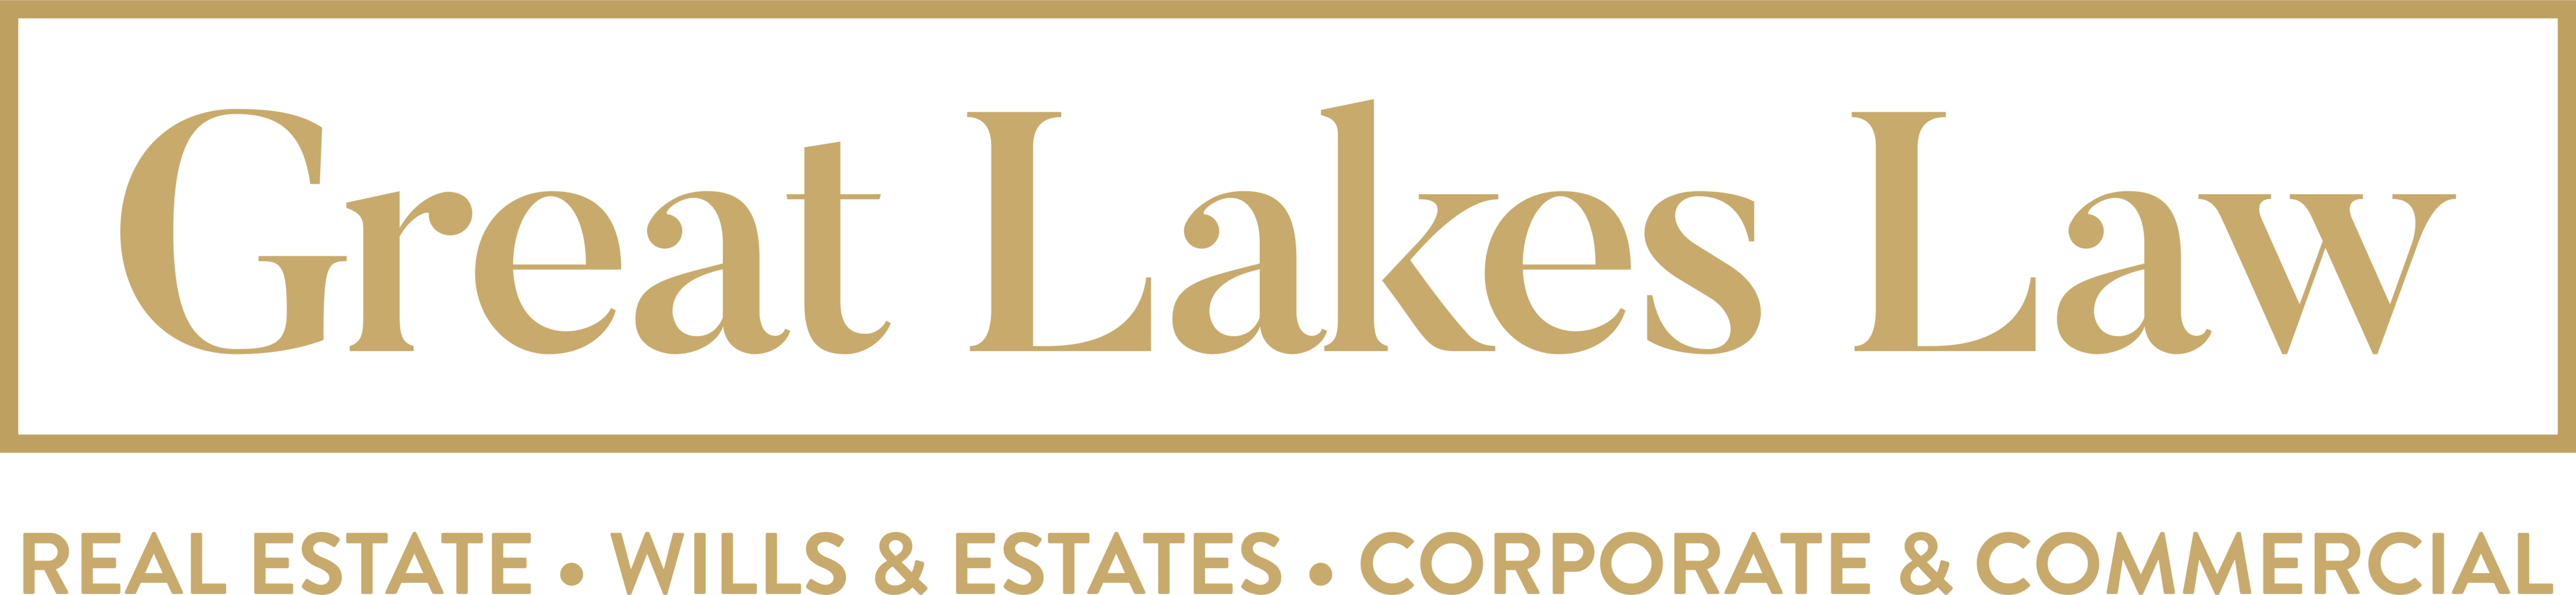 Great Lakes Law